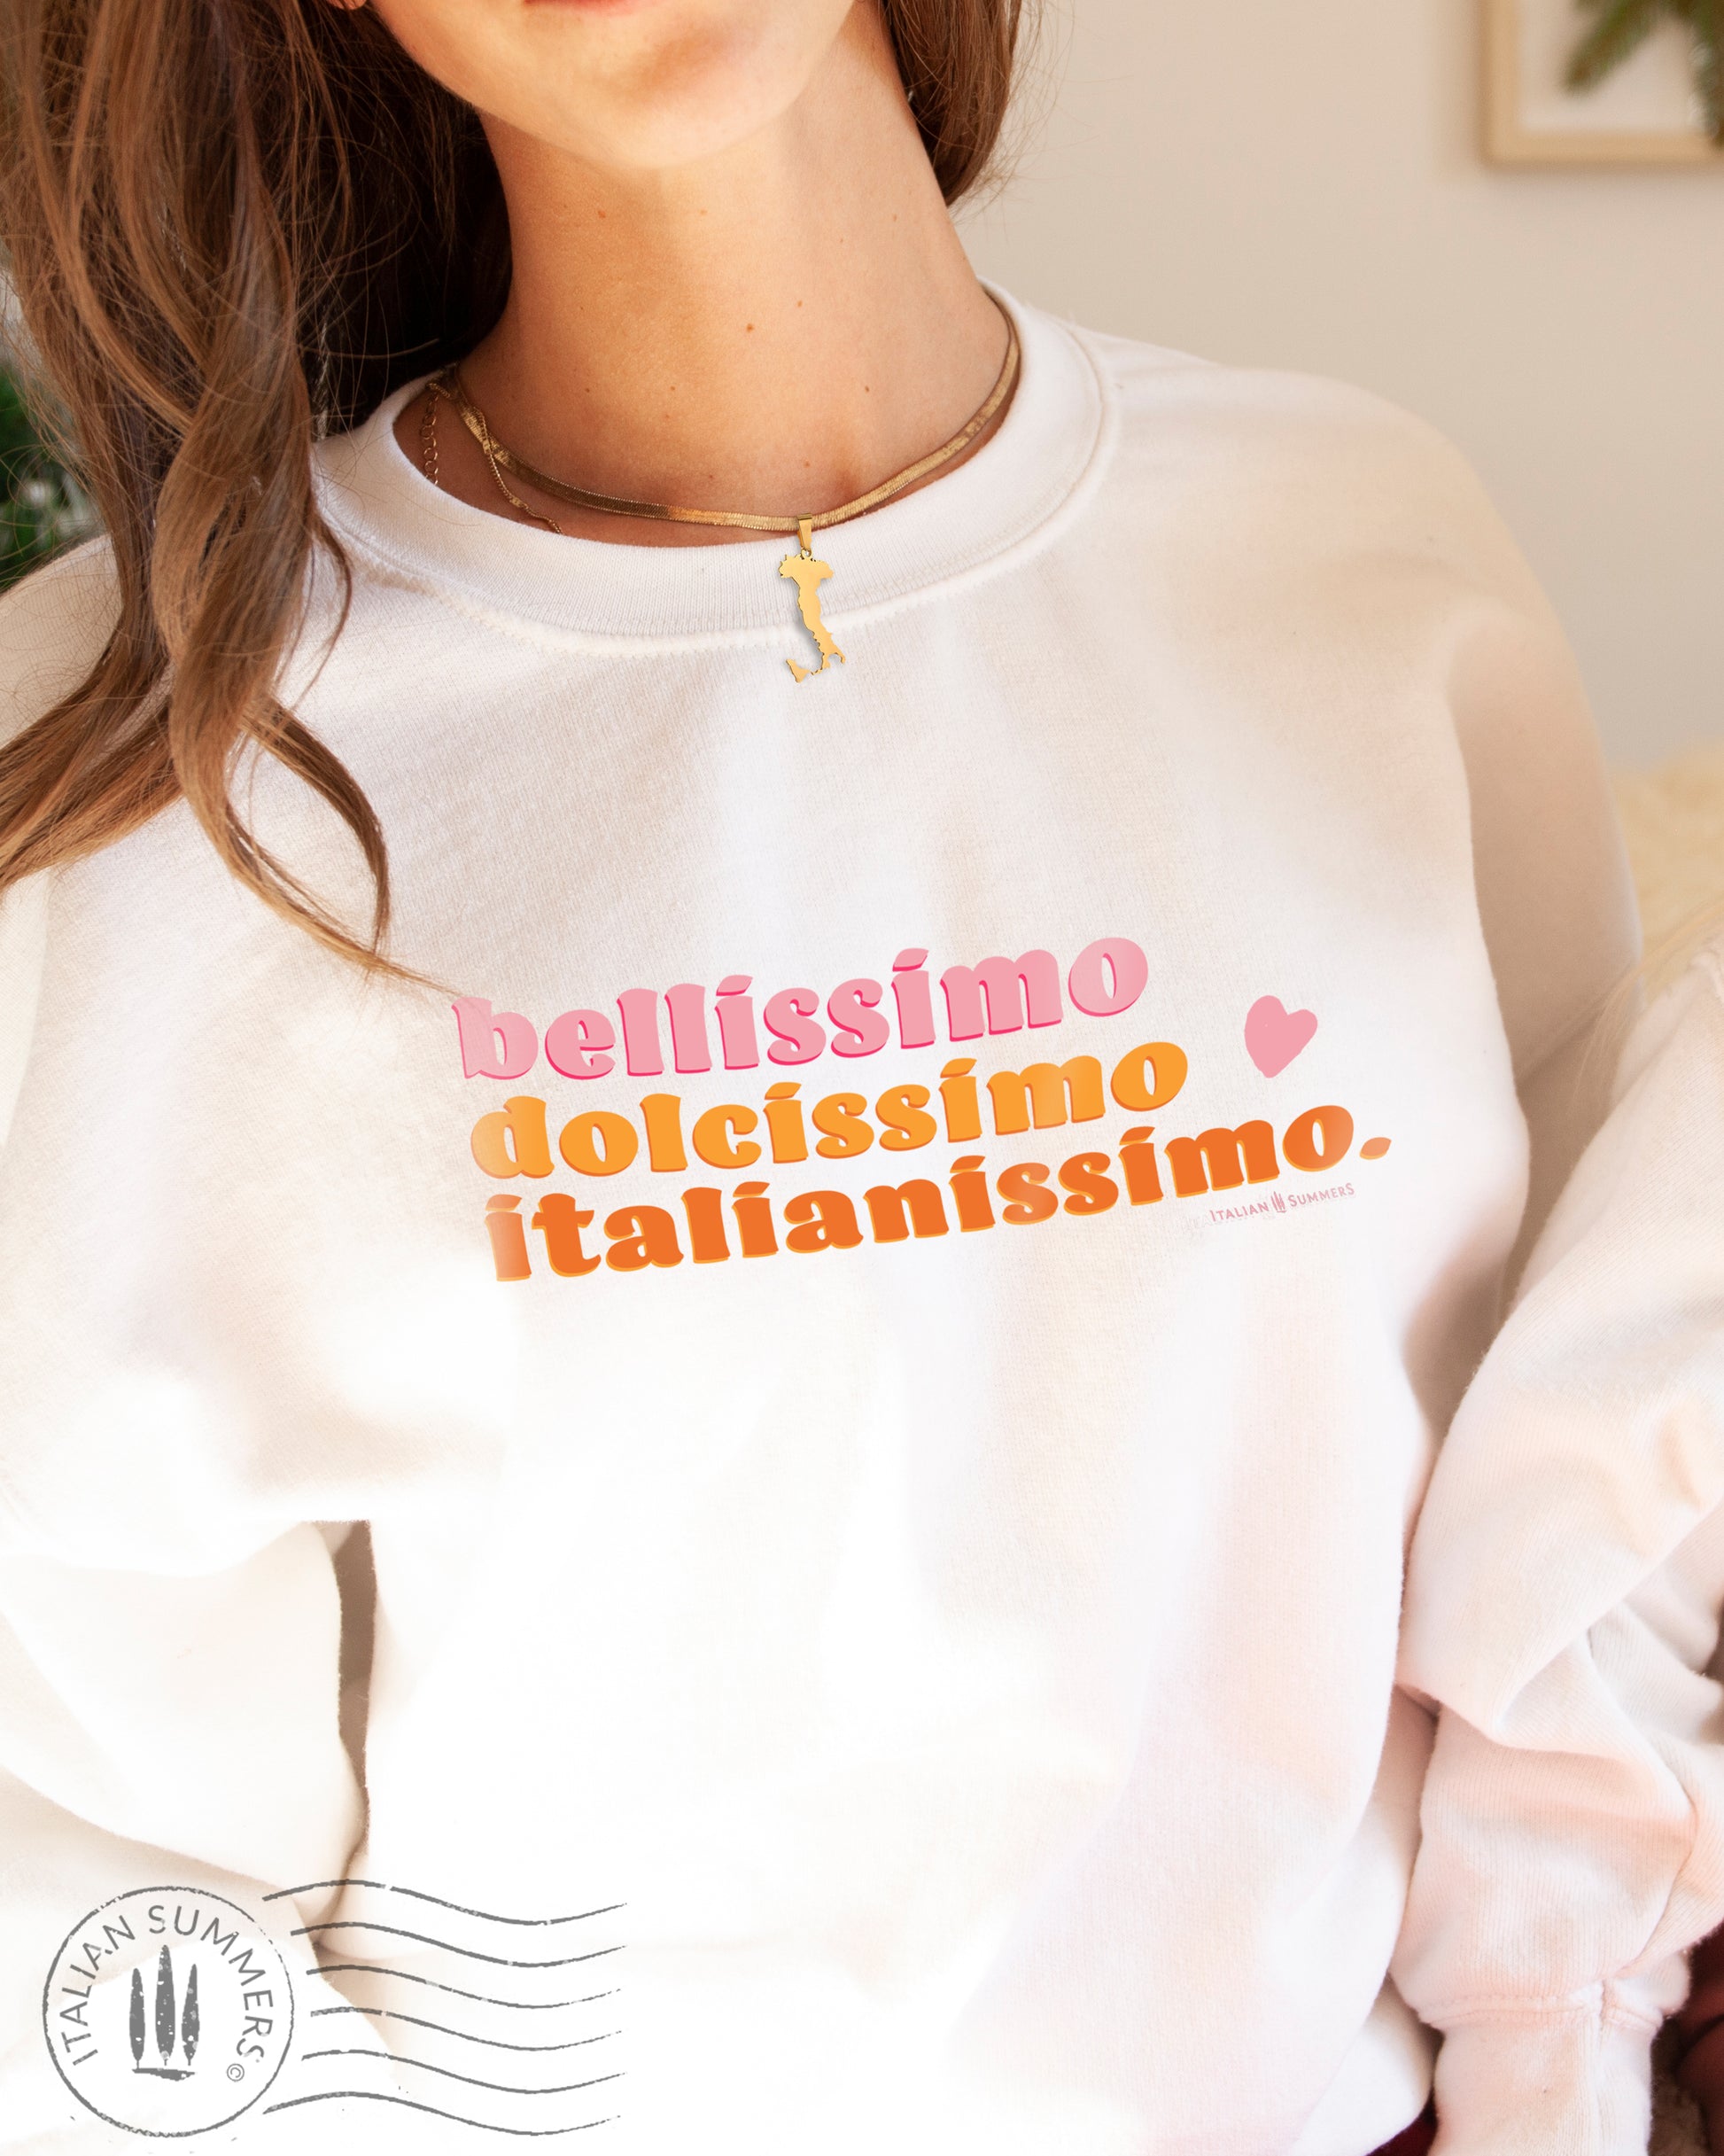 Italy inspired soft and cozy cotton blend sweatshirt with 1970s  pink,sunflower-yellow and orange retro font text  Bellissimo Dolcissimo Italianissimo.